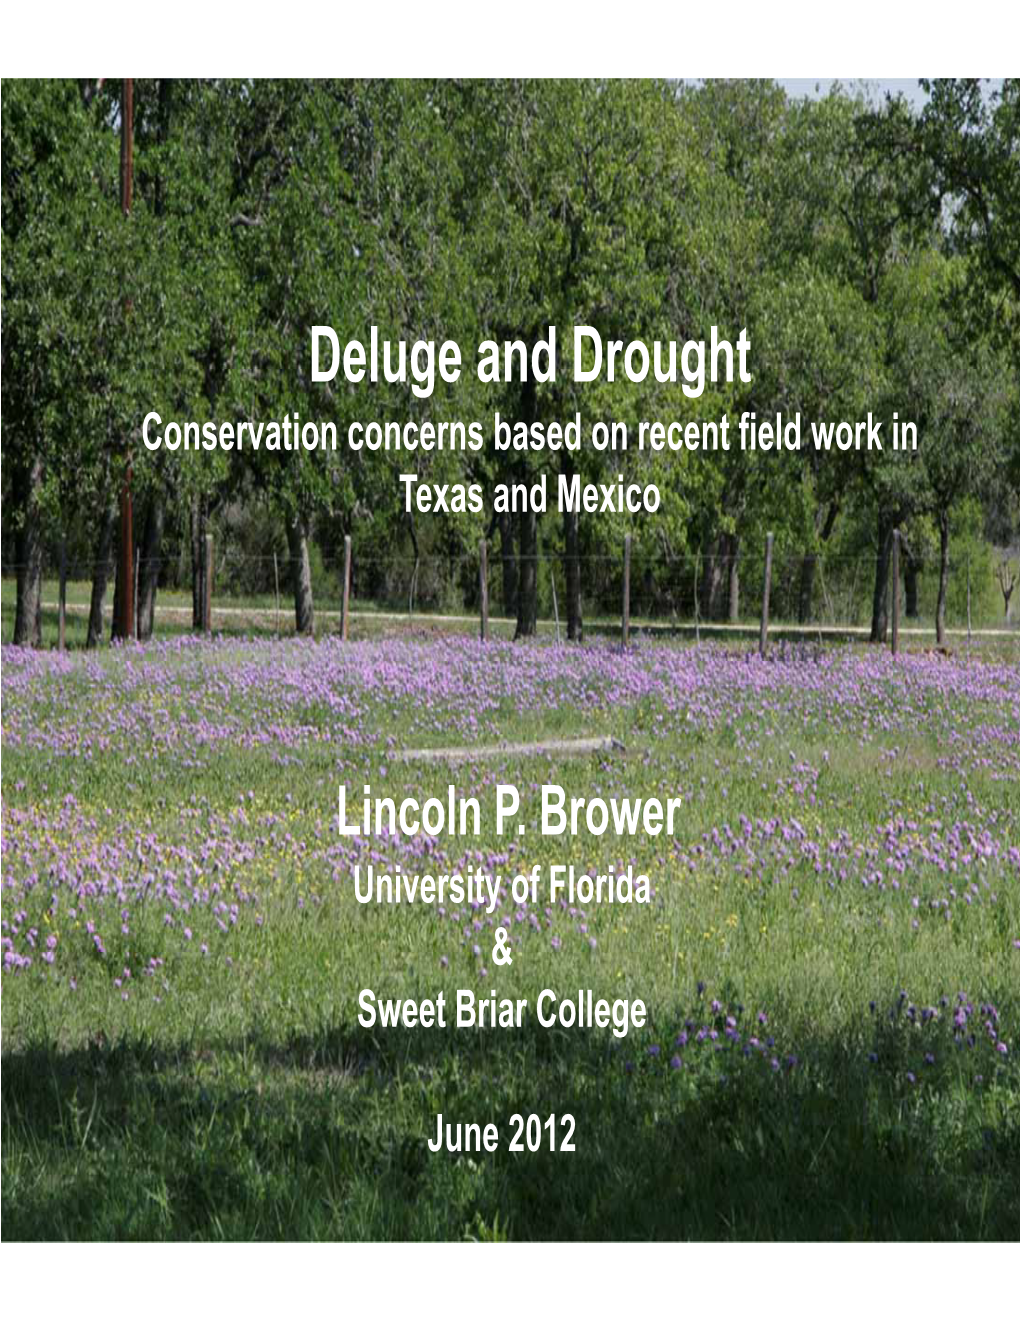 Deluge and Drought Conservation Concerns Based on Recent Field Work in Texas and Mexico